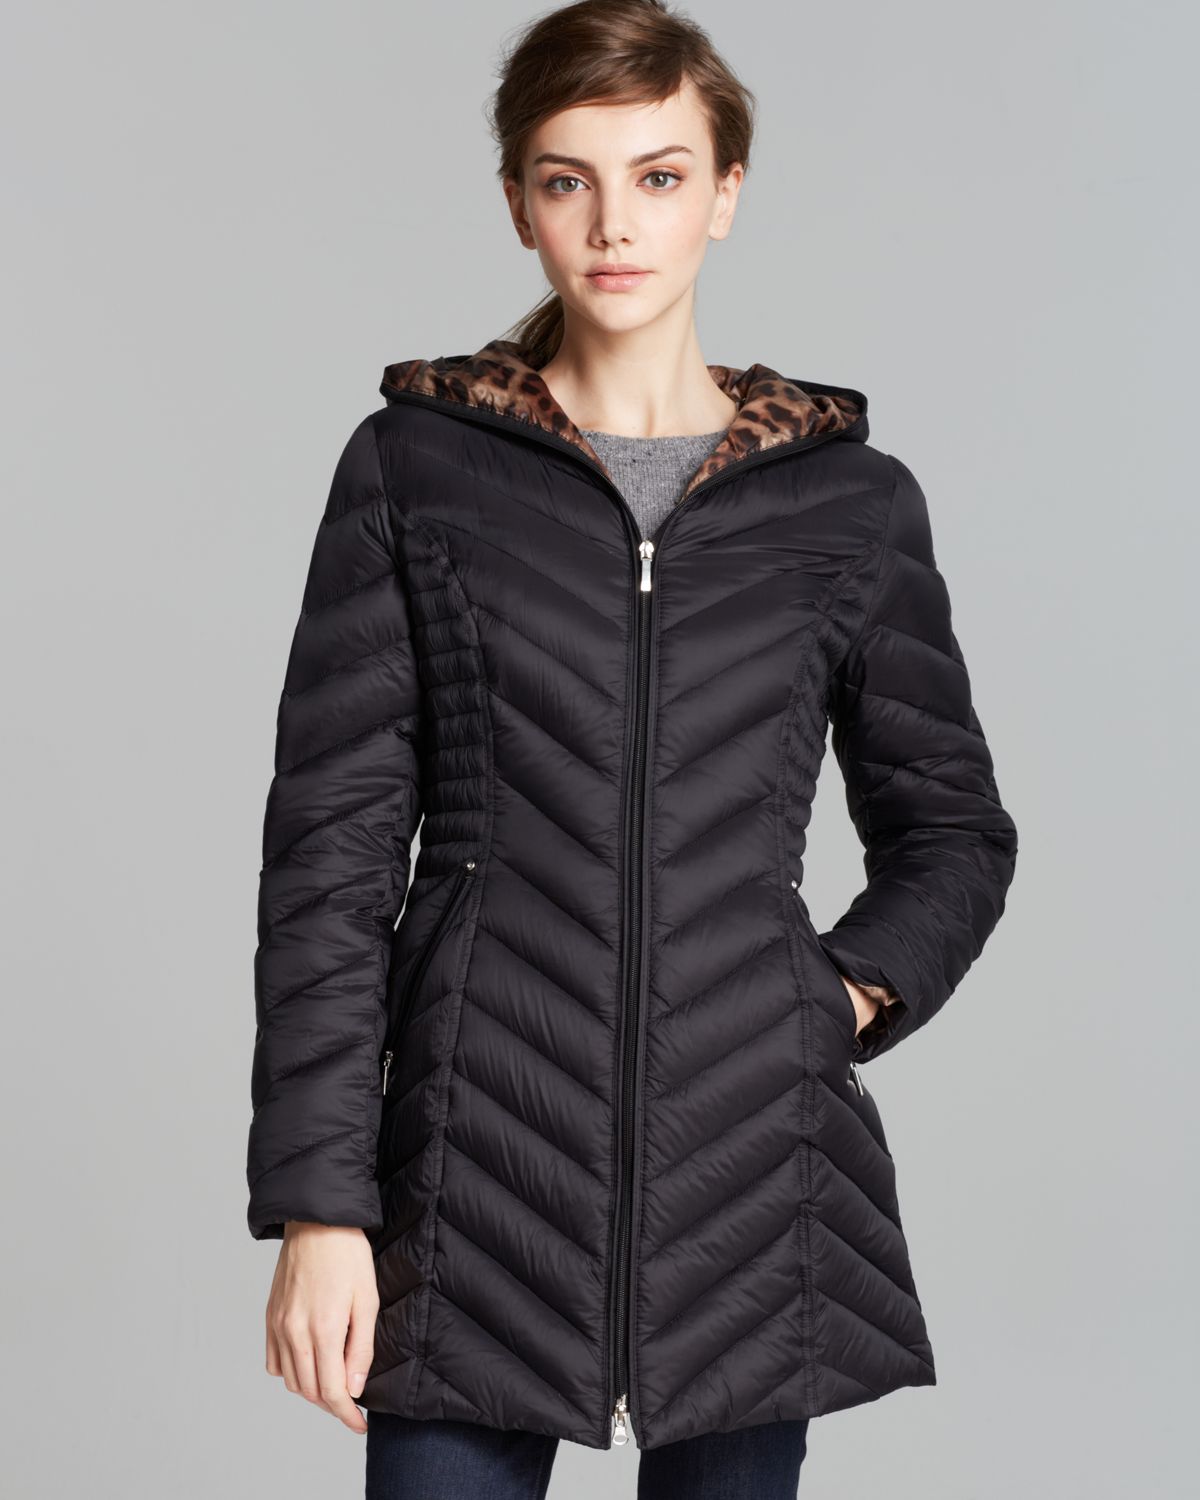 Lyst - Laundry by shelli segal Packable Lightweight Down Jacket in Black